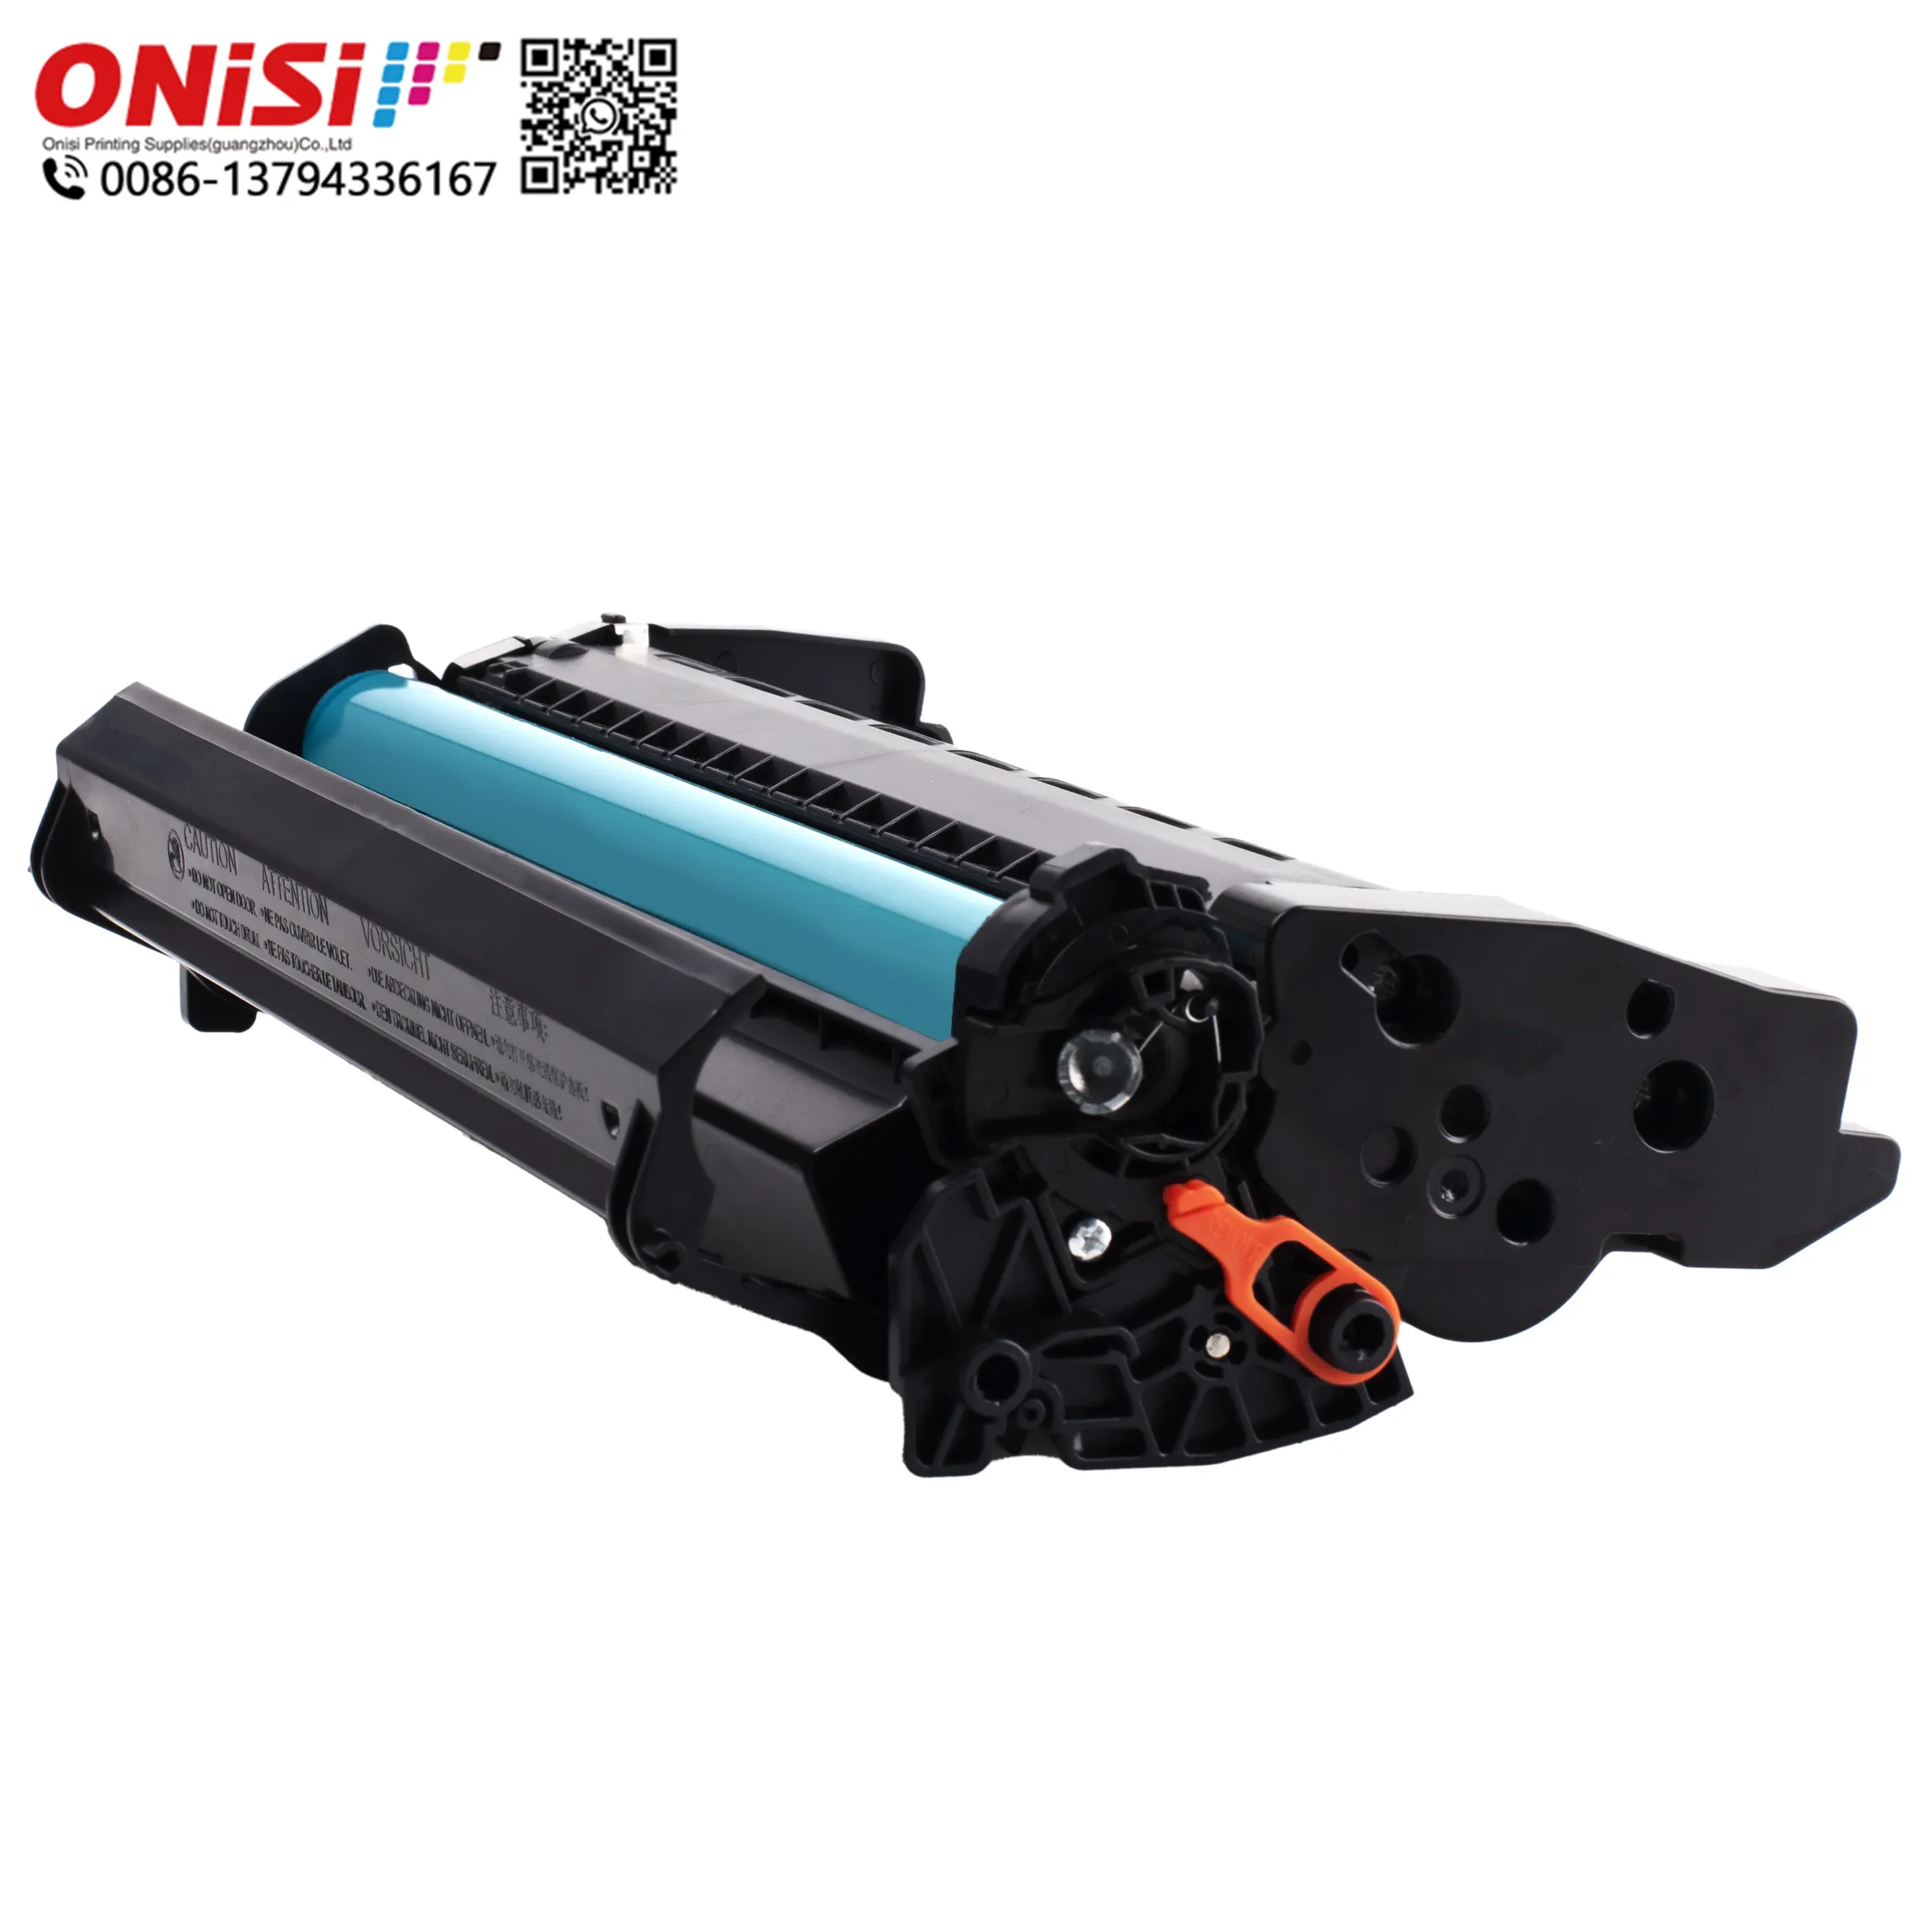 59a Toner Cartridge for hp 285 288 12 401 410 203 205 17 219 125 126 130